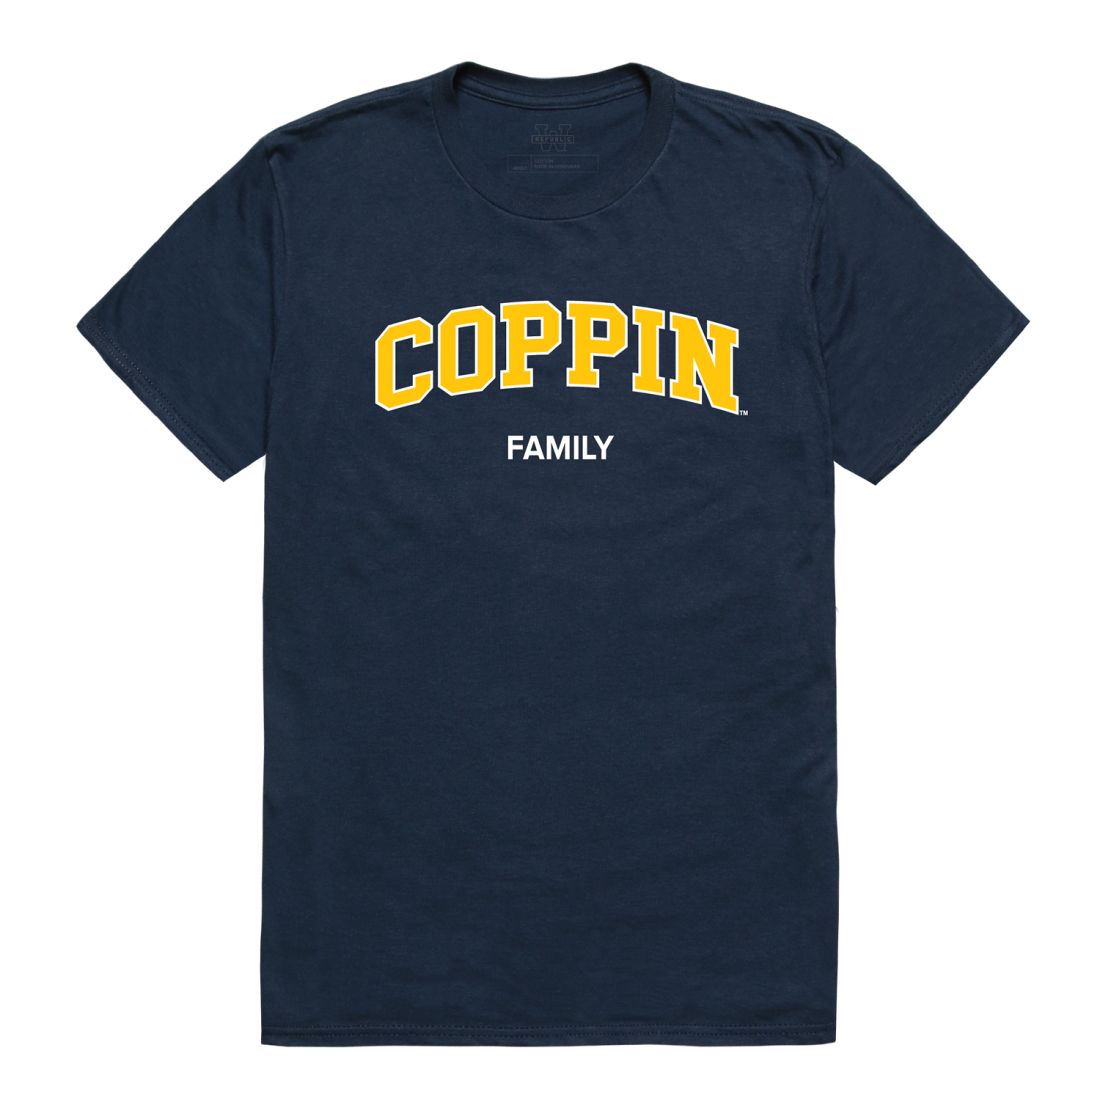 CSU Coppin State University Eagles Family T-Shirt